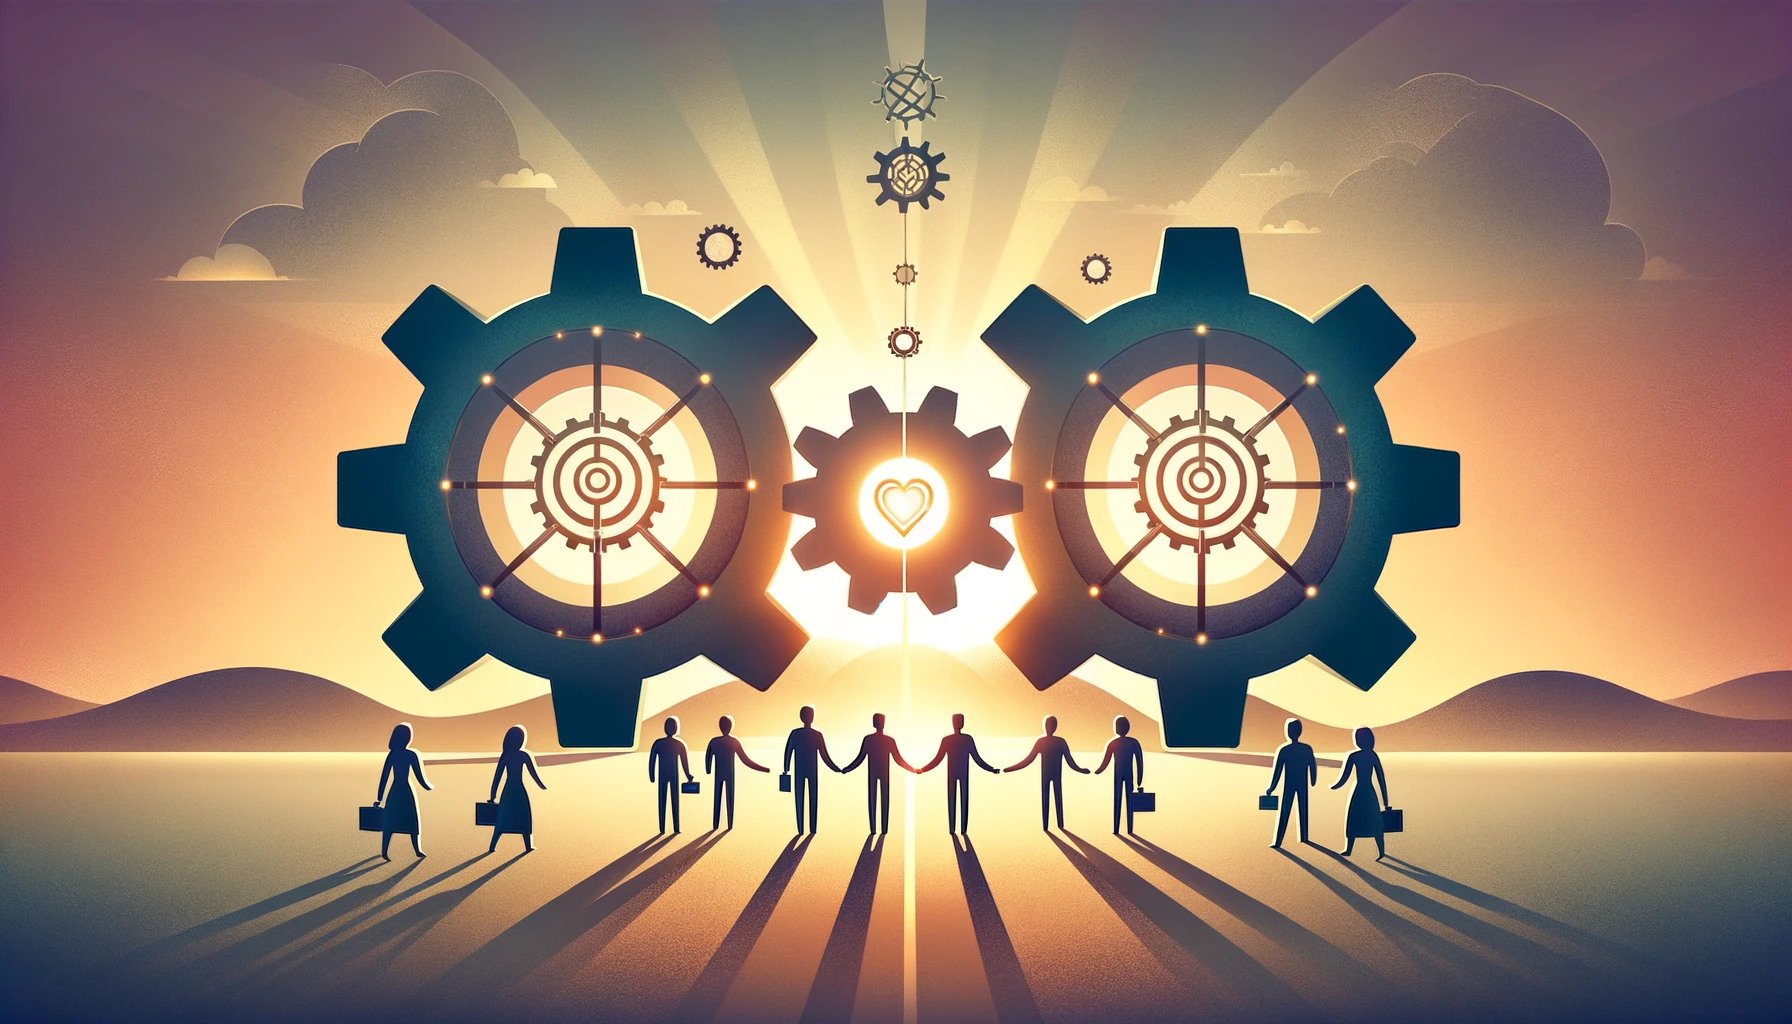 A wide, simple illustration showing Strategic Business Partnerships through figures on either side of large gears, working together to align them perfectly in the center, symbolizing the Partnership strategy and the synchronization of goals for Accelerated business growth. The emergence of a shared vision icon above the gears represents unified objectives, set against a gradient of dawn colors, highlighting the beginning of a harmonious and productive partnership.